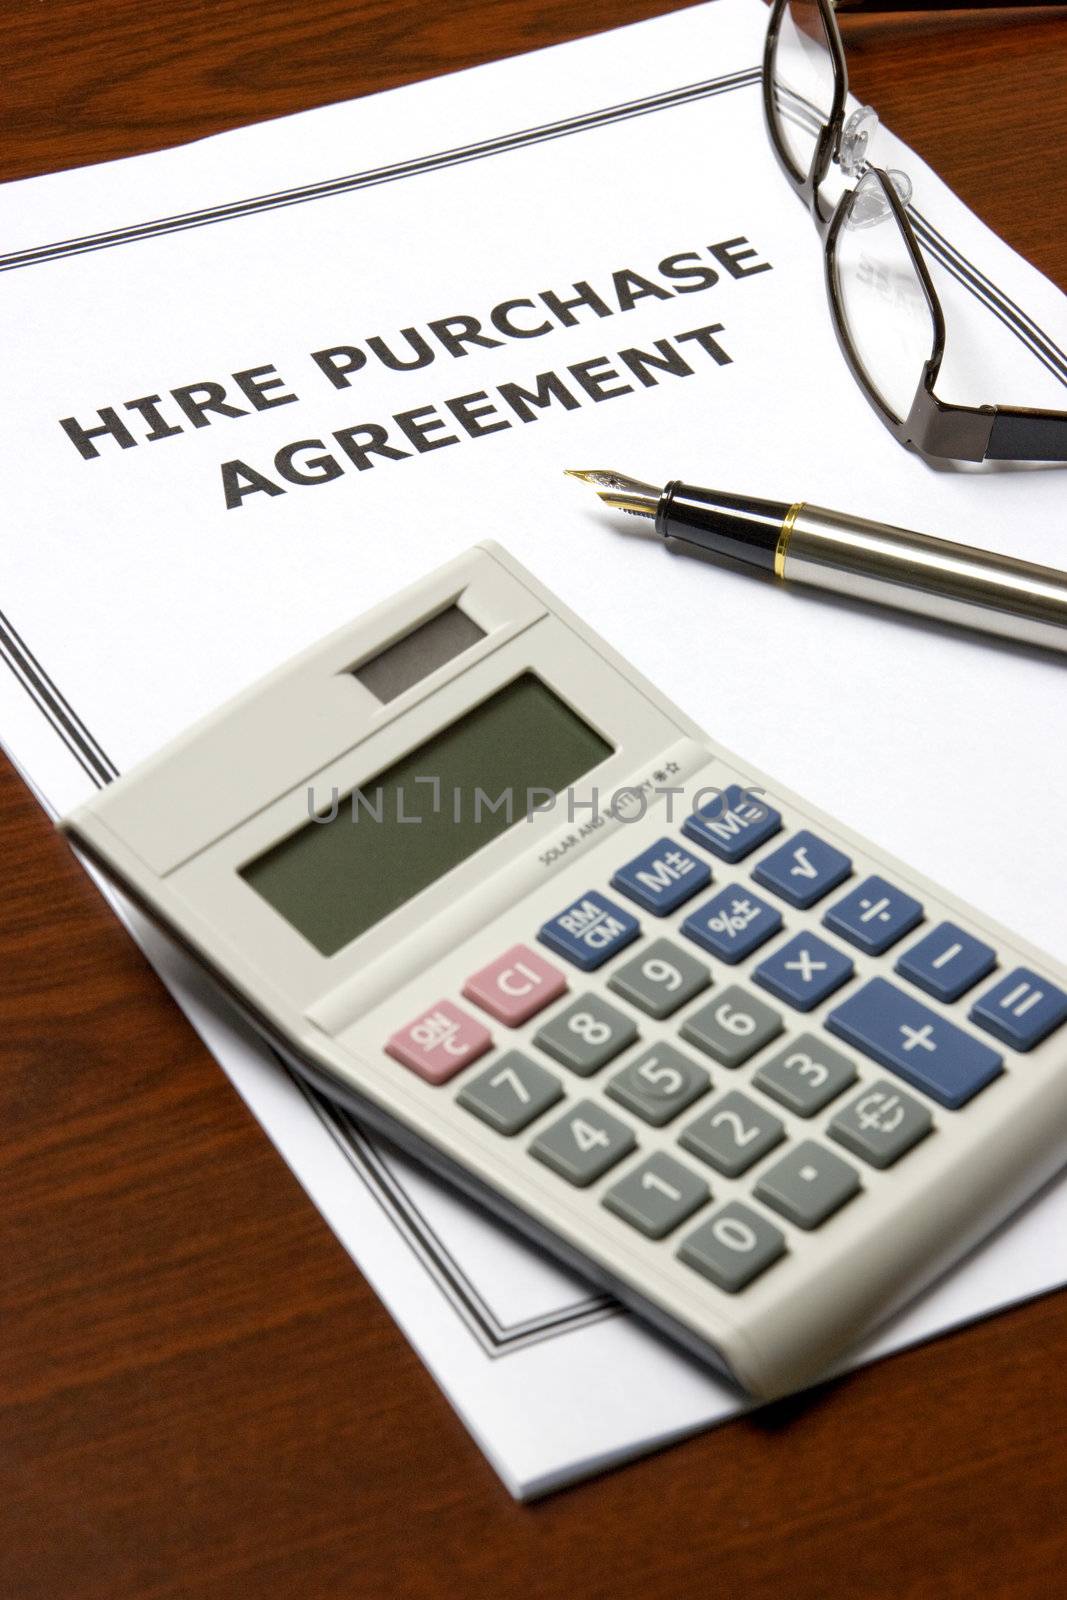 Image of a hire purchase agreement on an office table.